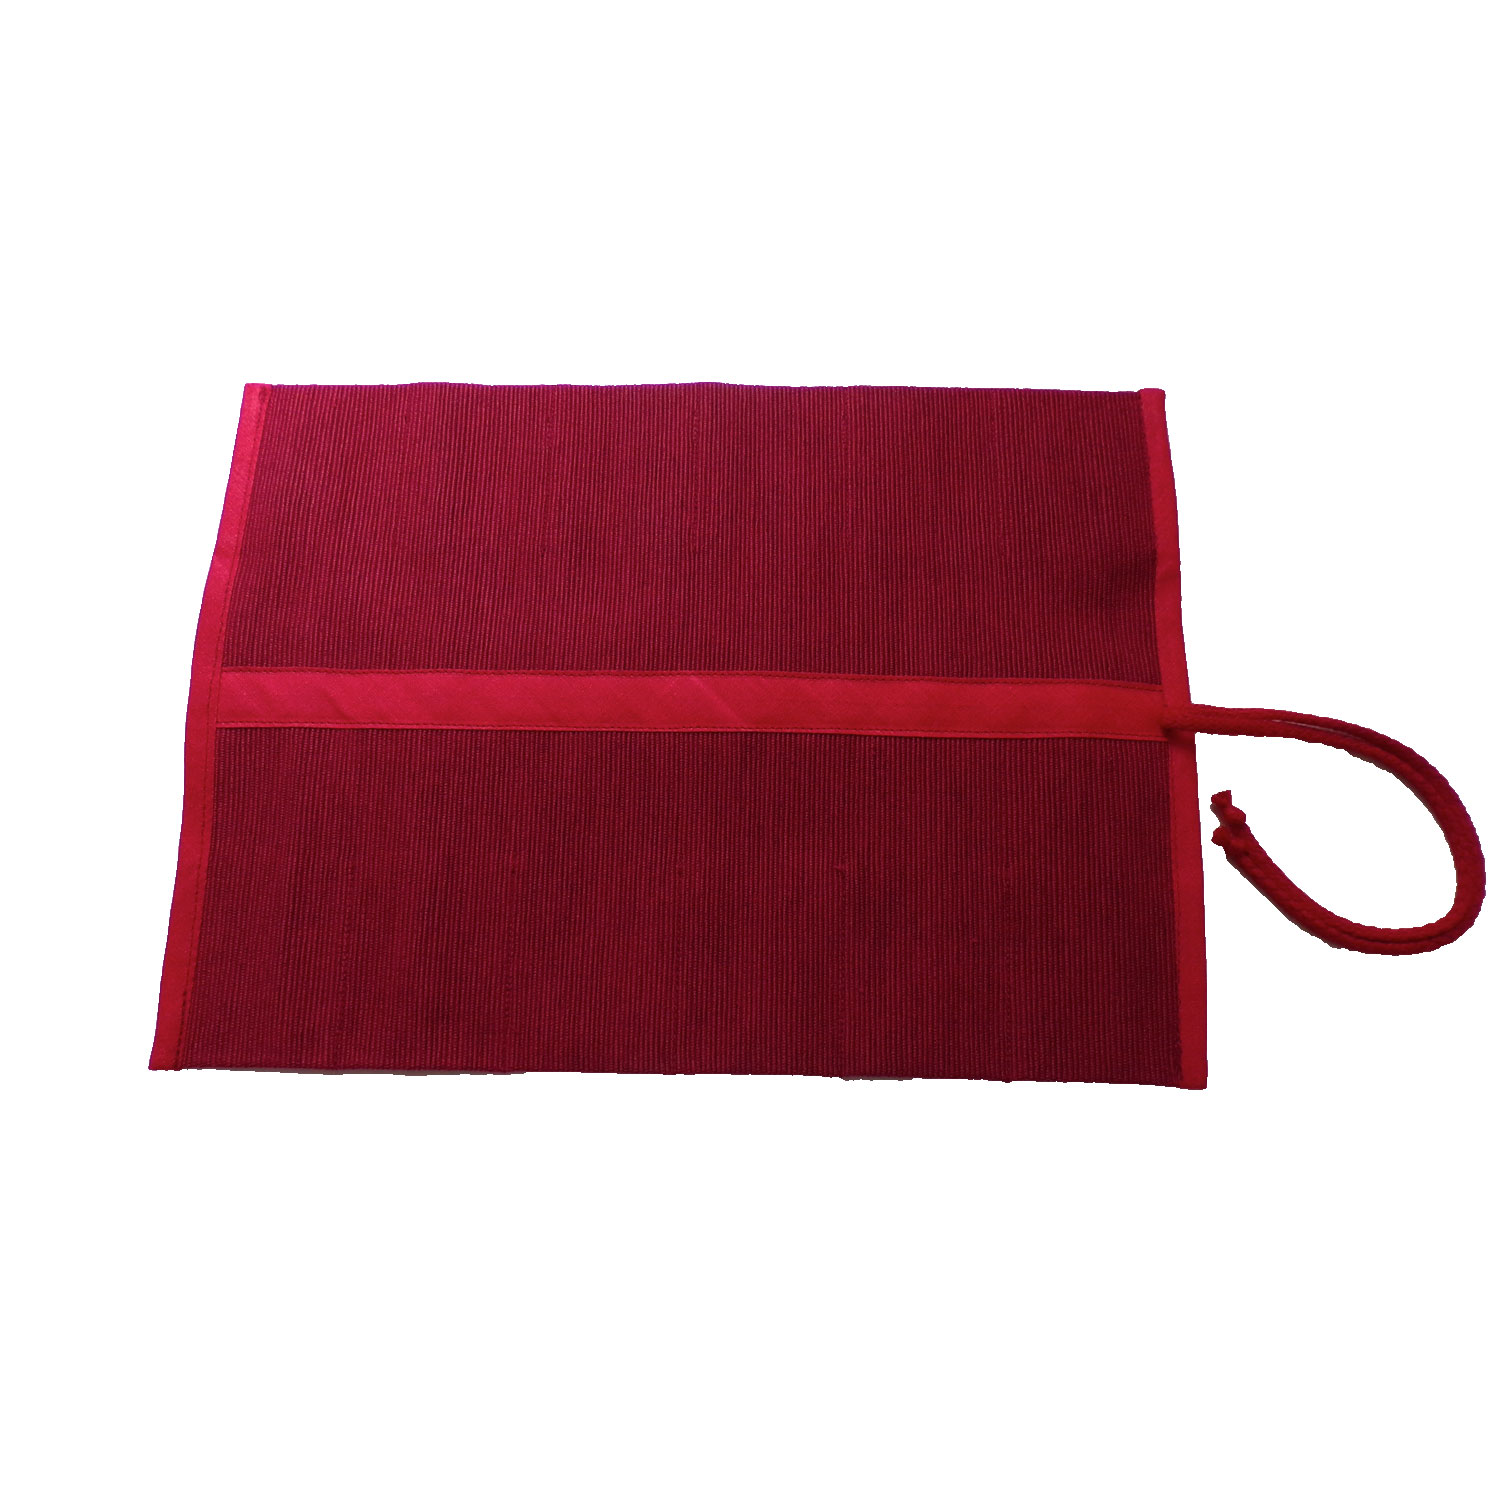 Roll-up pencil case red, 12s